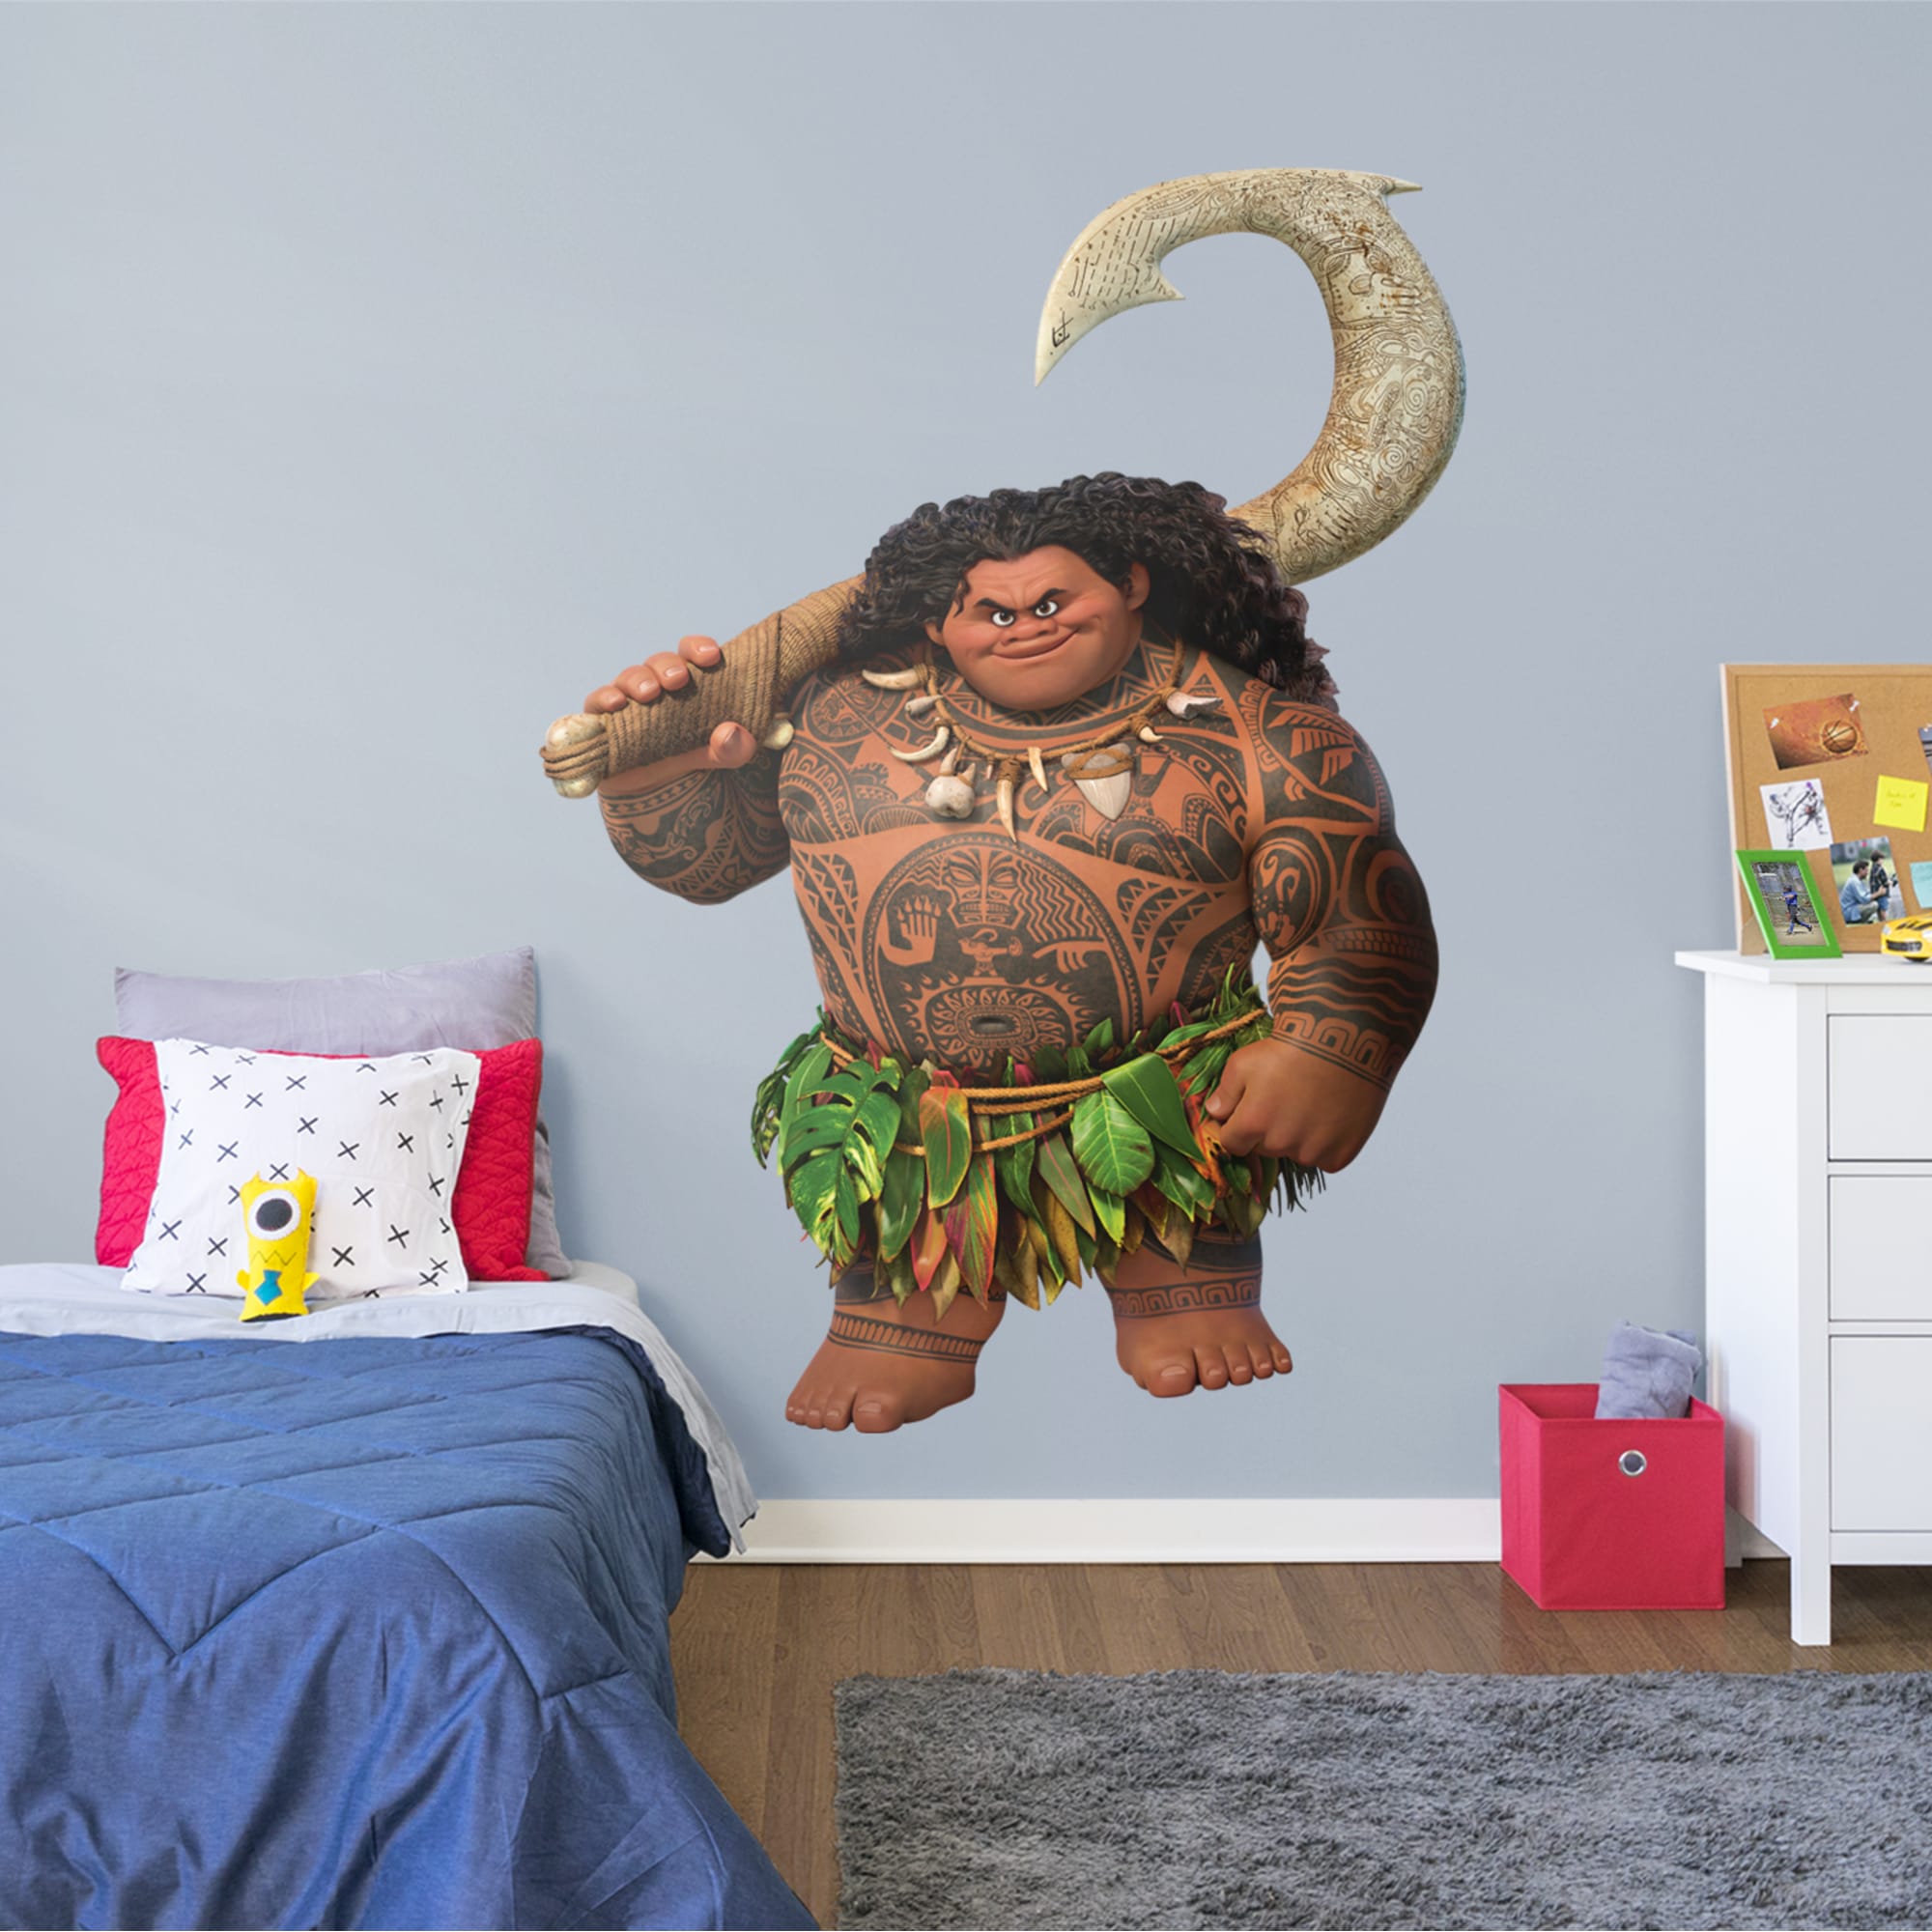 Maui - Officially Licensed Disney Removable Wall Decal 62.0"W x 80.0"H by Fathead | Vinyl